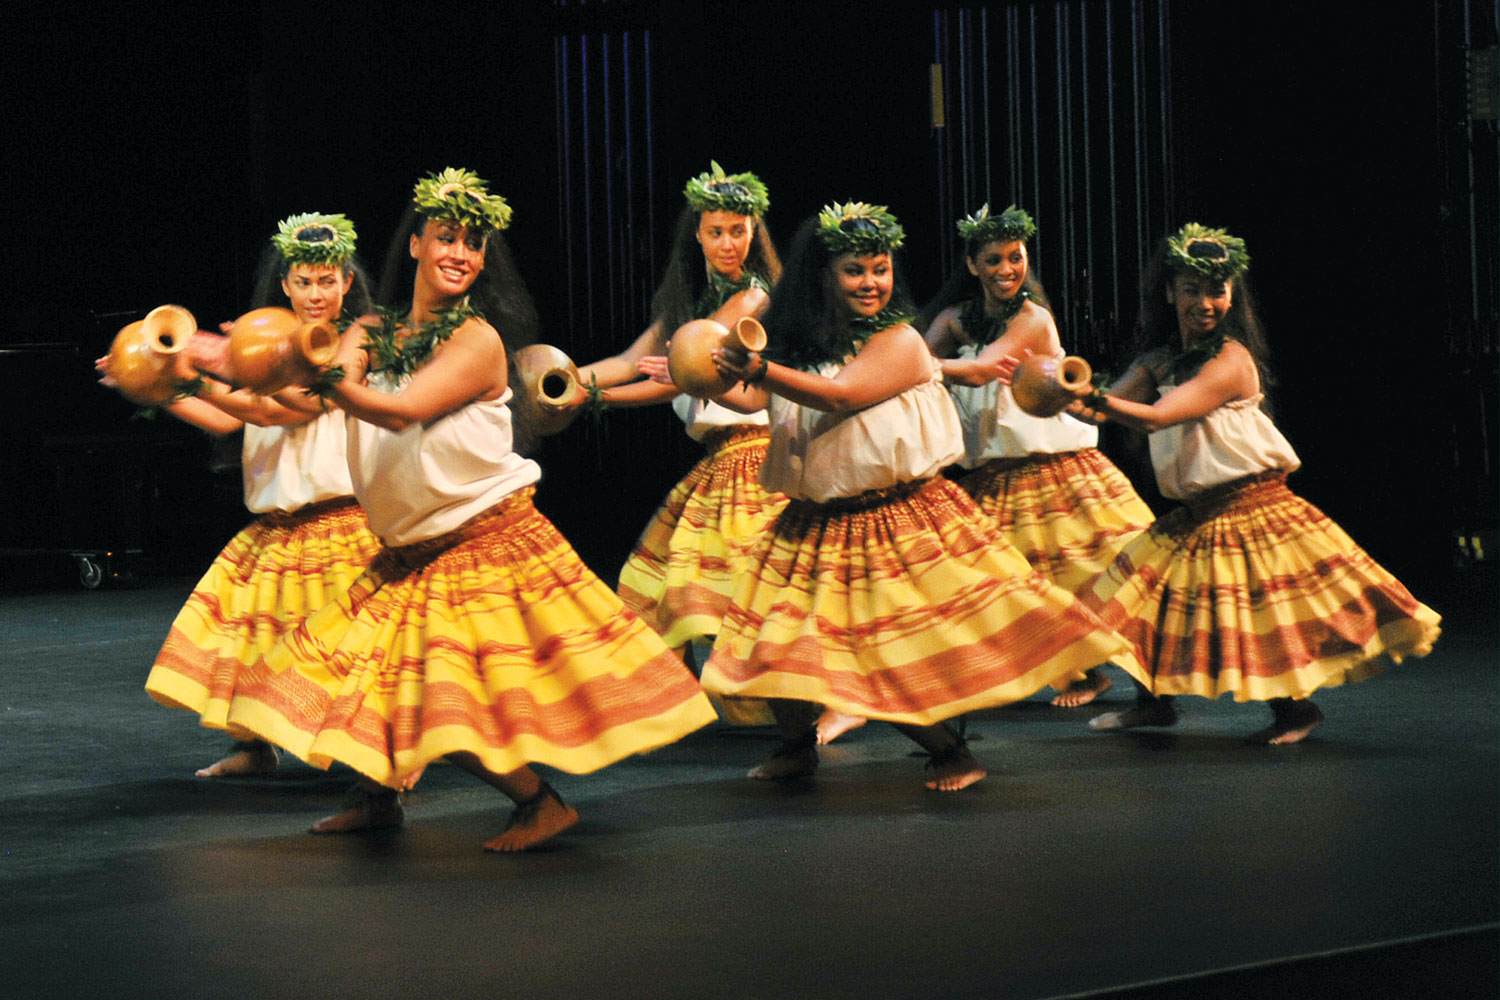 brandon einstein recommends video of hula dancers pic